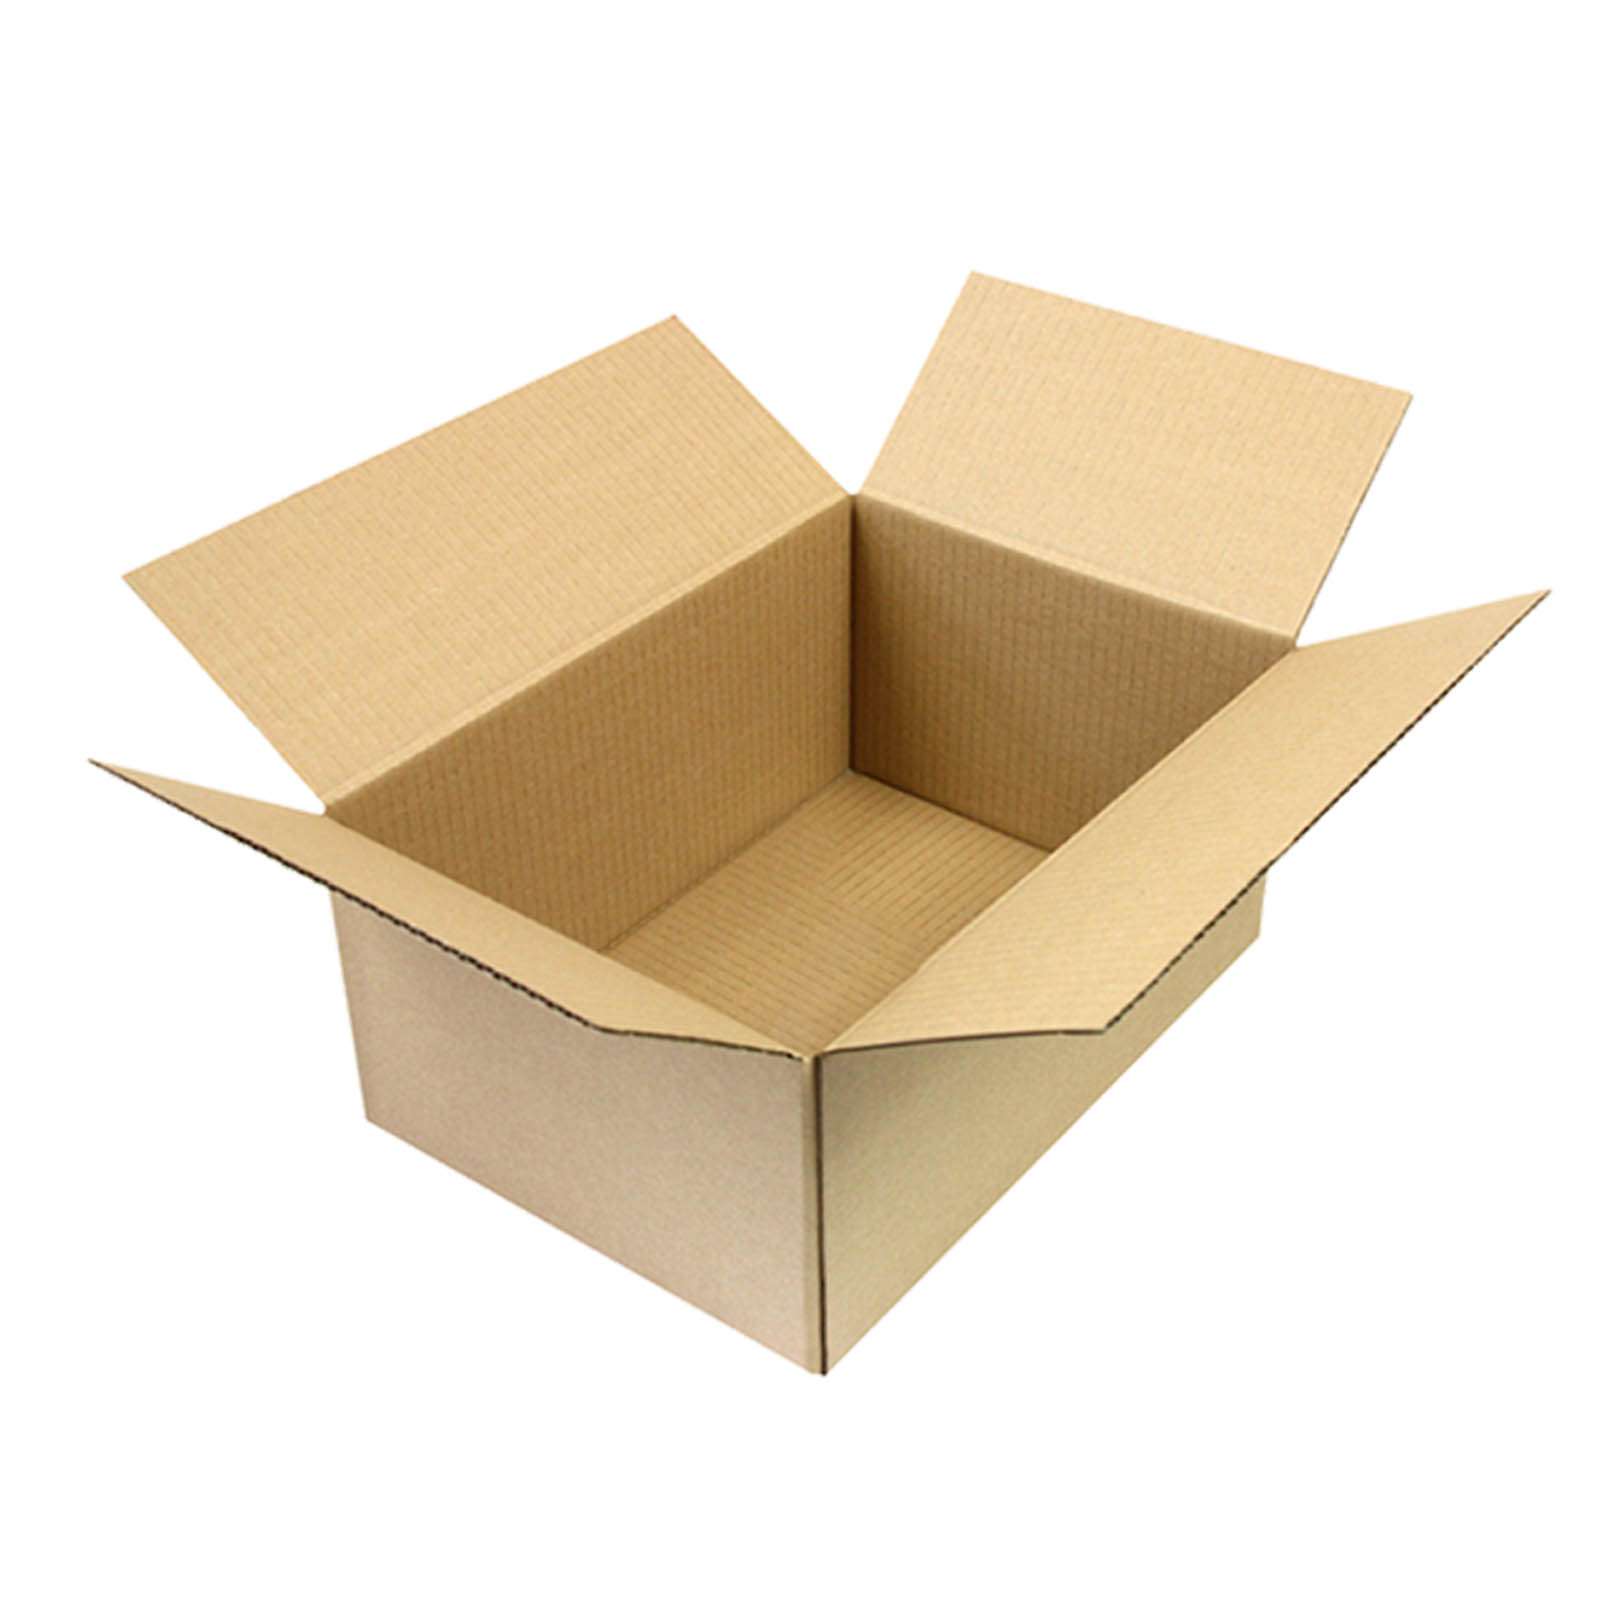 Cardboard box 300x215x140 mm - with digital print 2-sided (neighbouring sides)